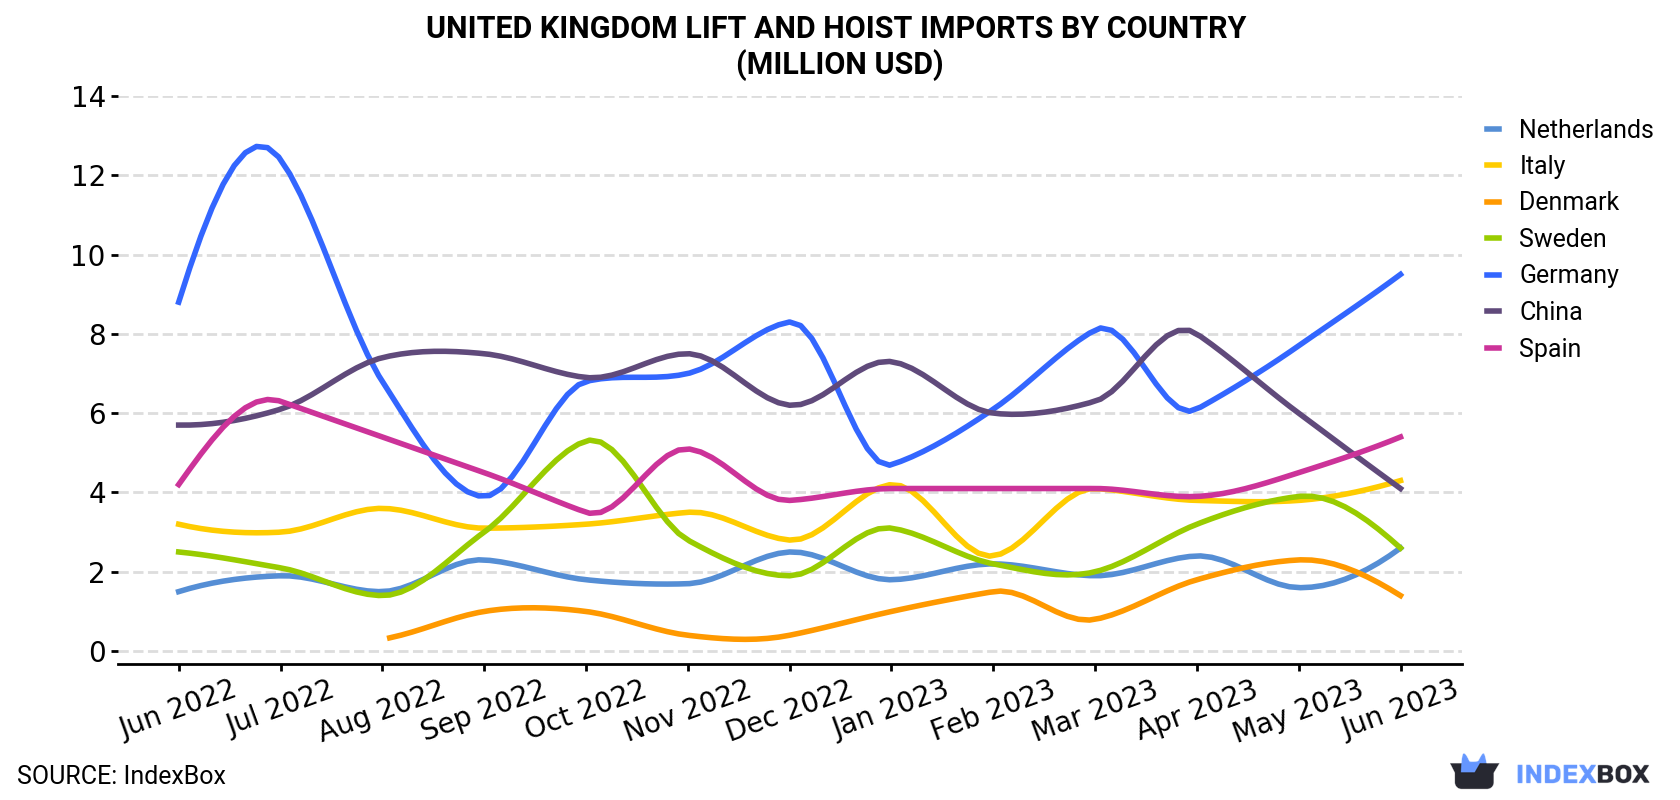 United Kingdom Lift And Hoist Imports By Country (Million USD)